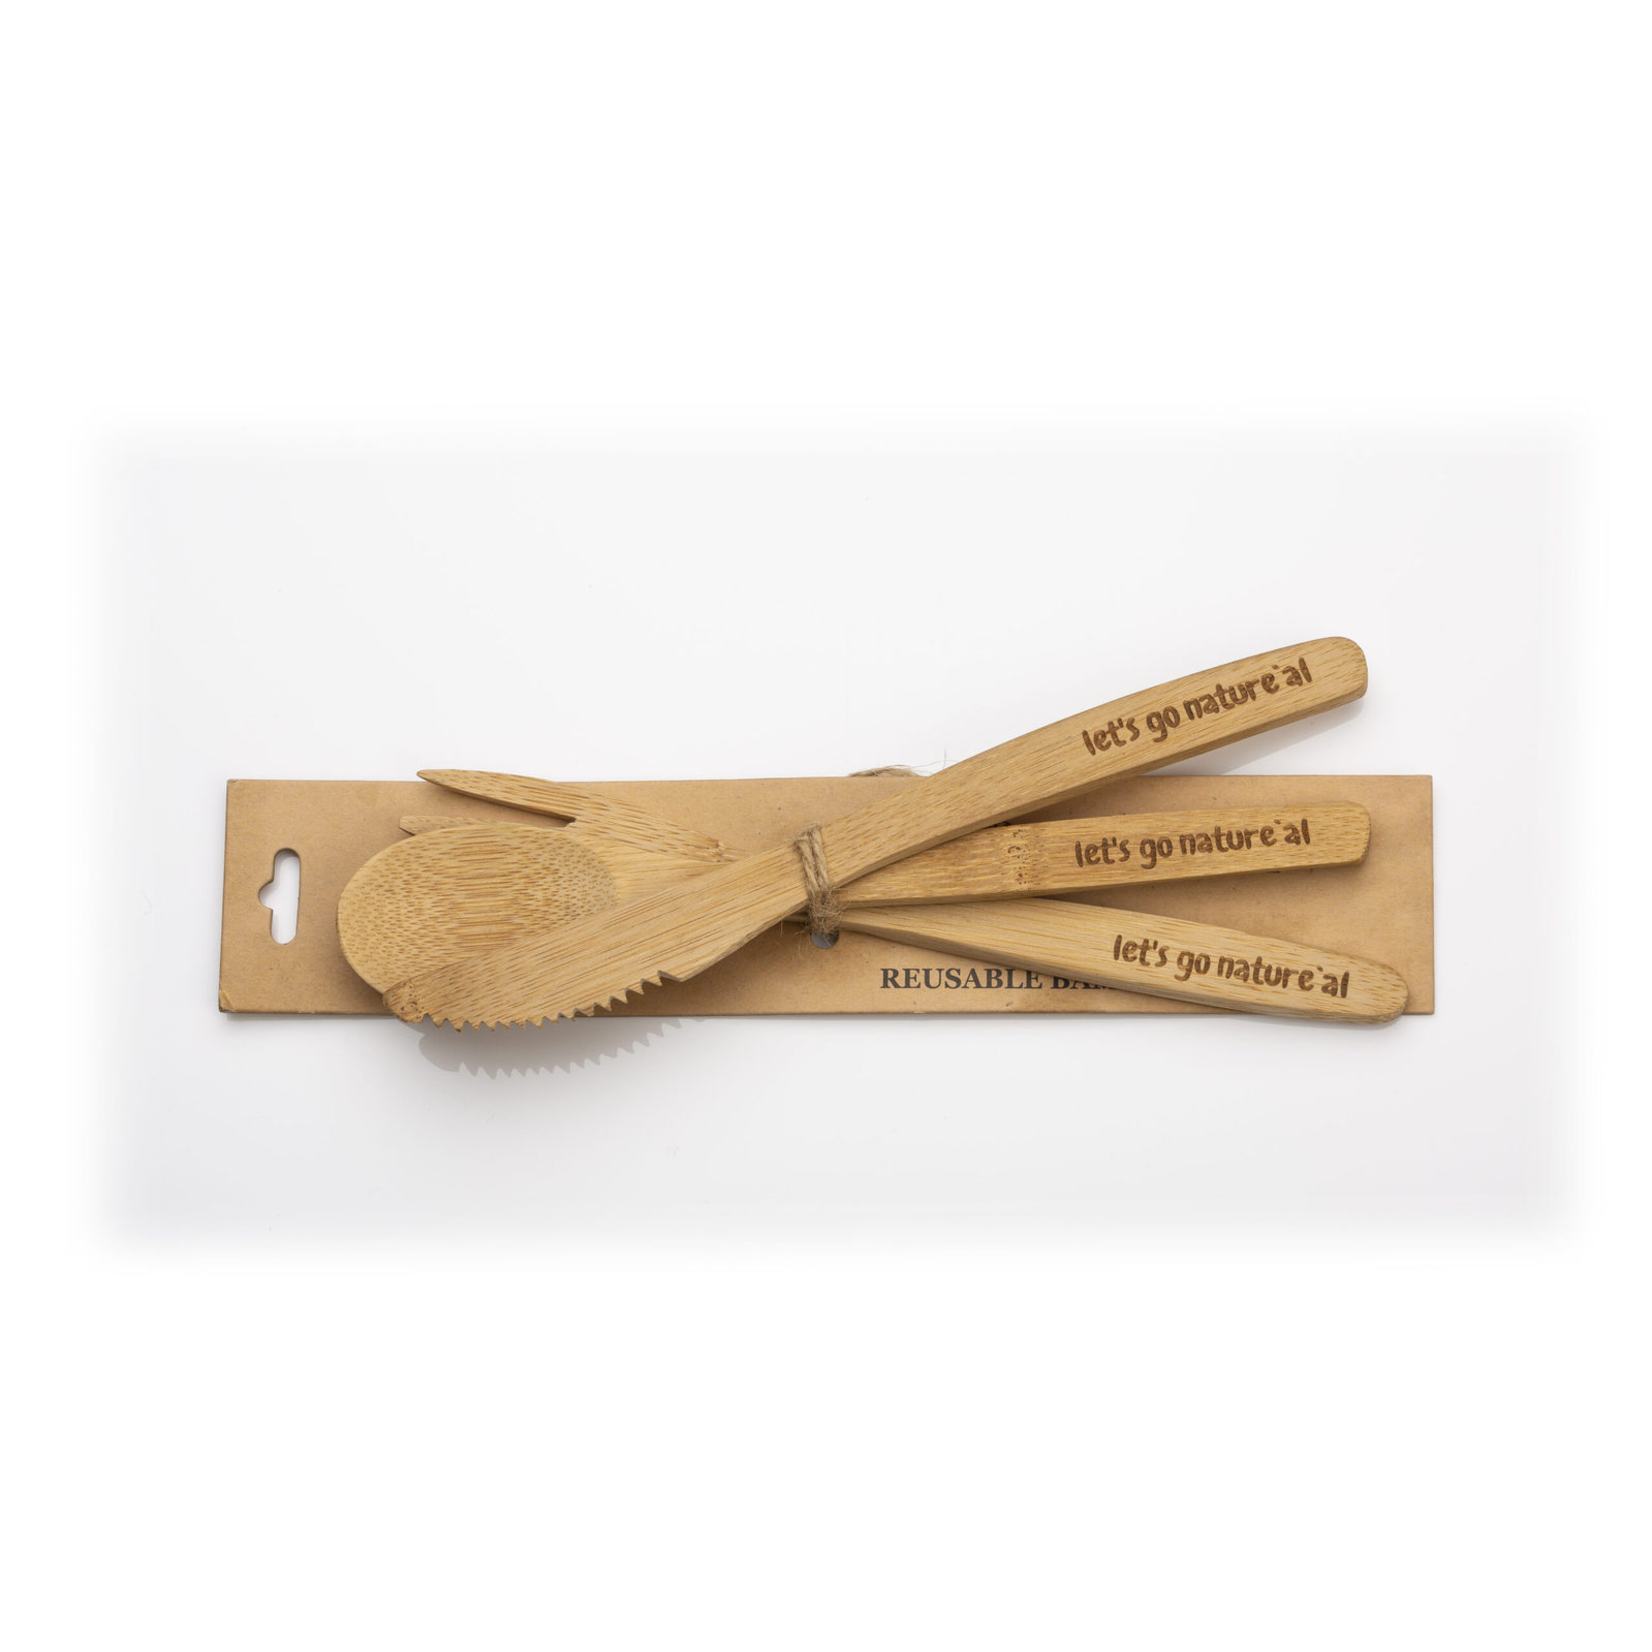 Let's Go Nature'al Let's Go Natureal Reusable Bamboo Cutlery Set